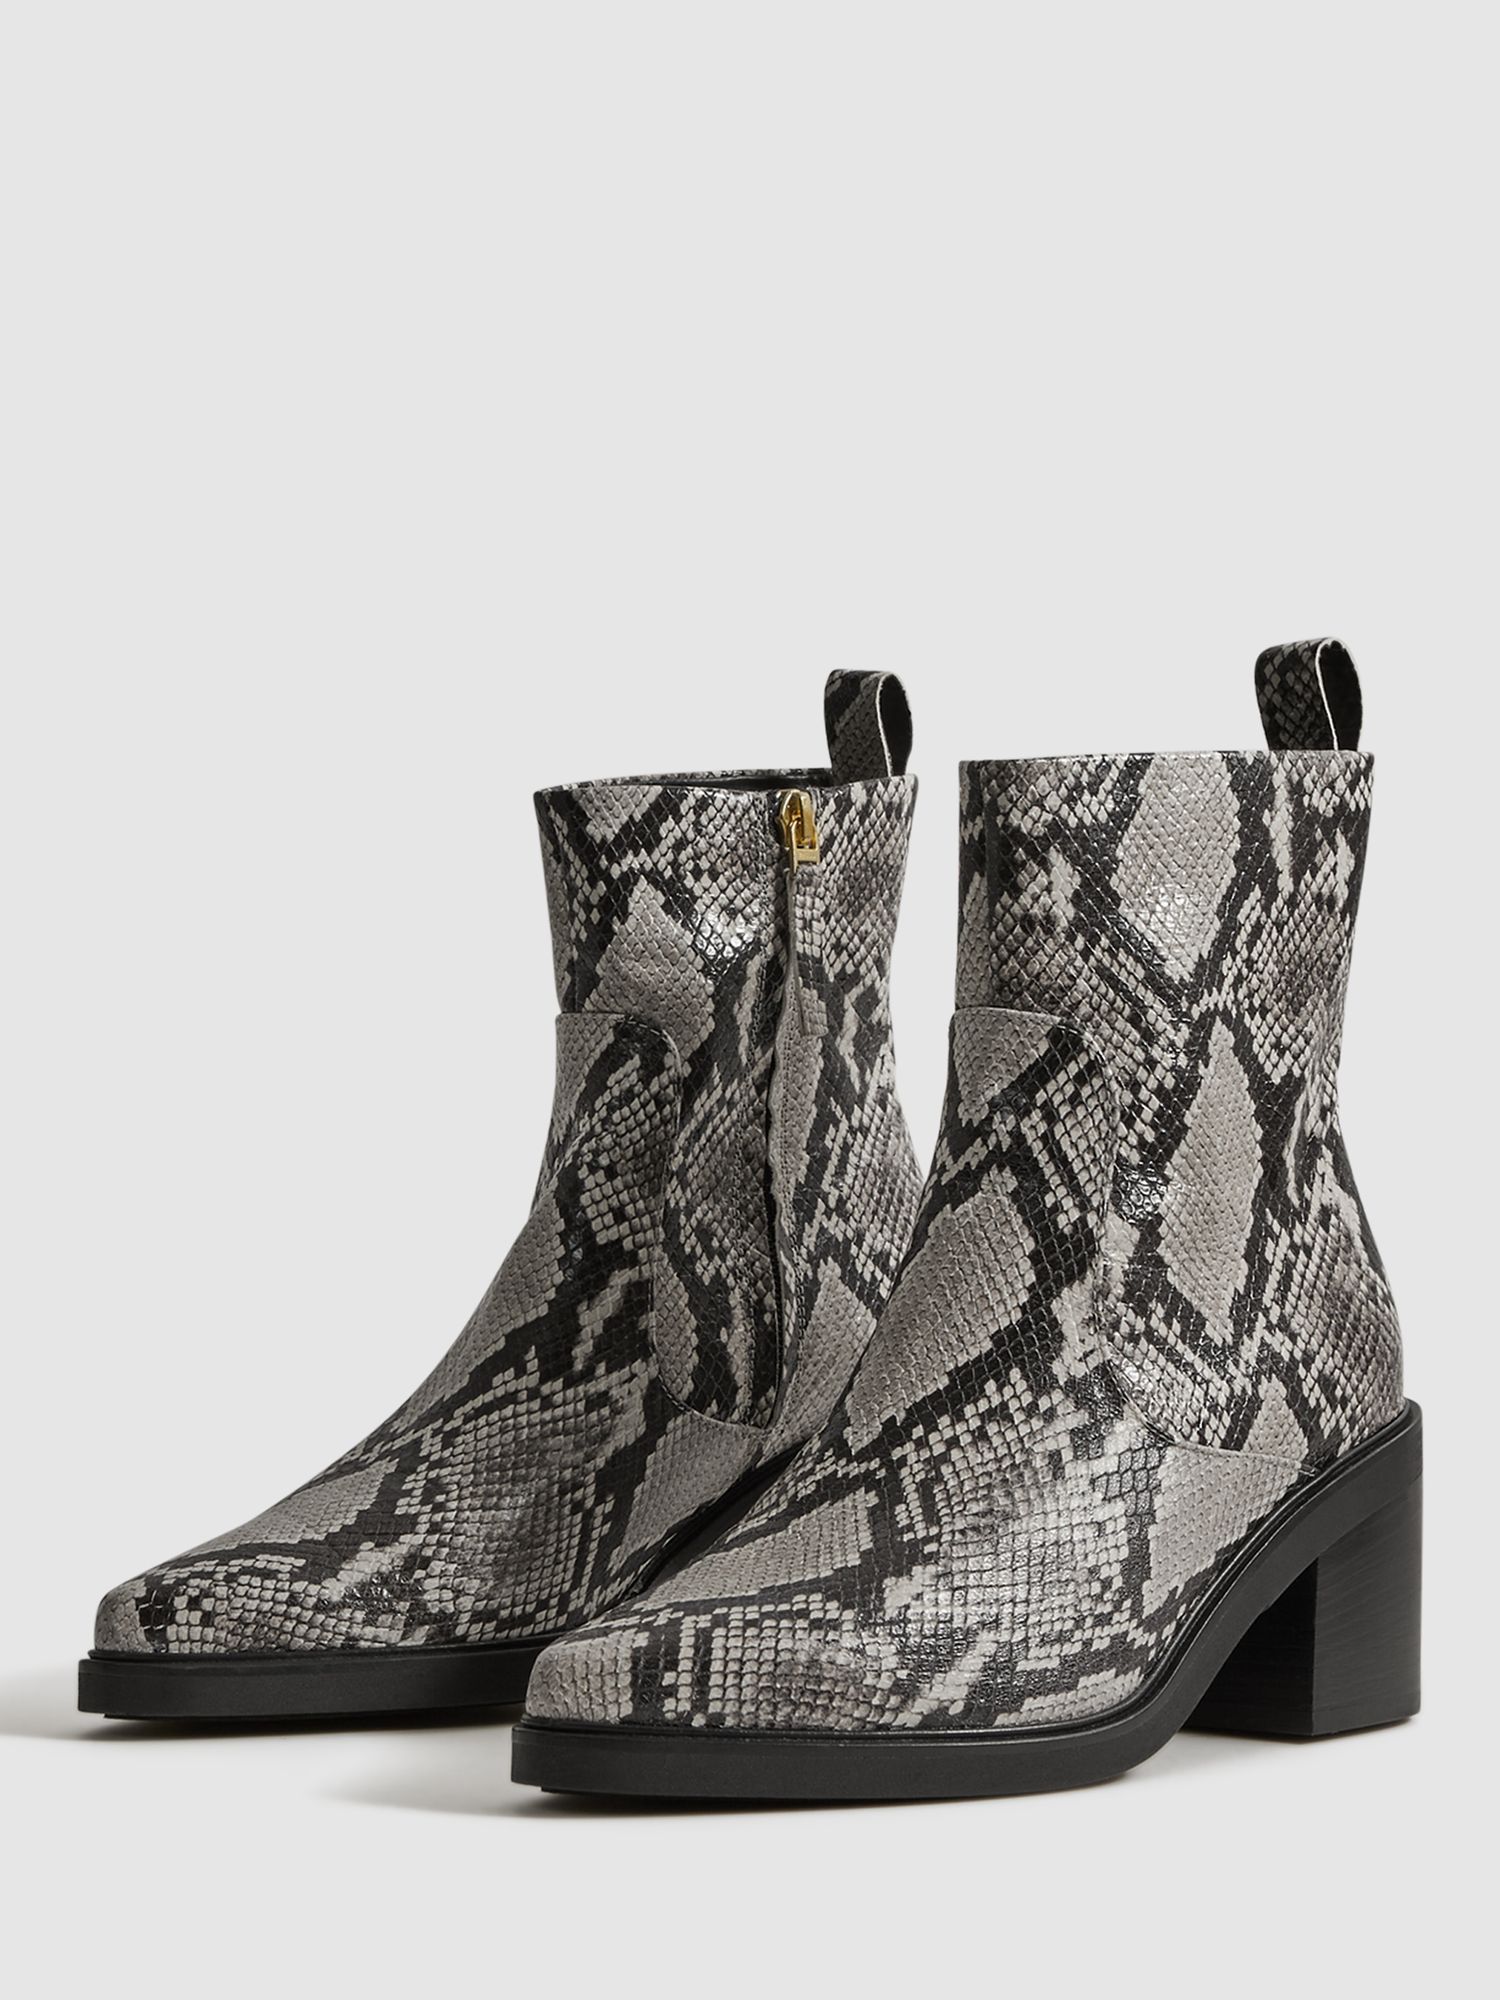 Reiss Sienna Snake Print Leather Ankle Boots, Multi, 3